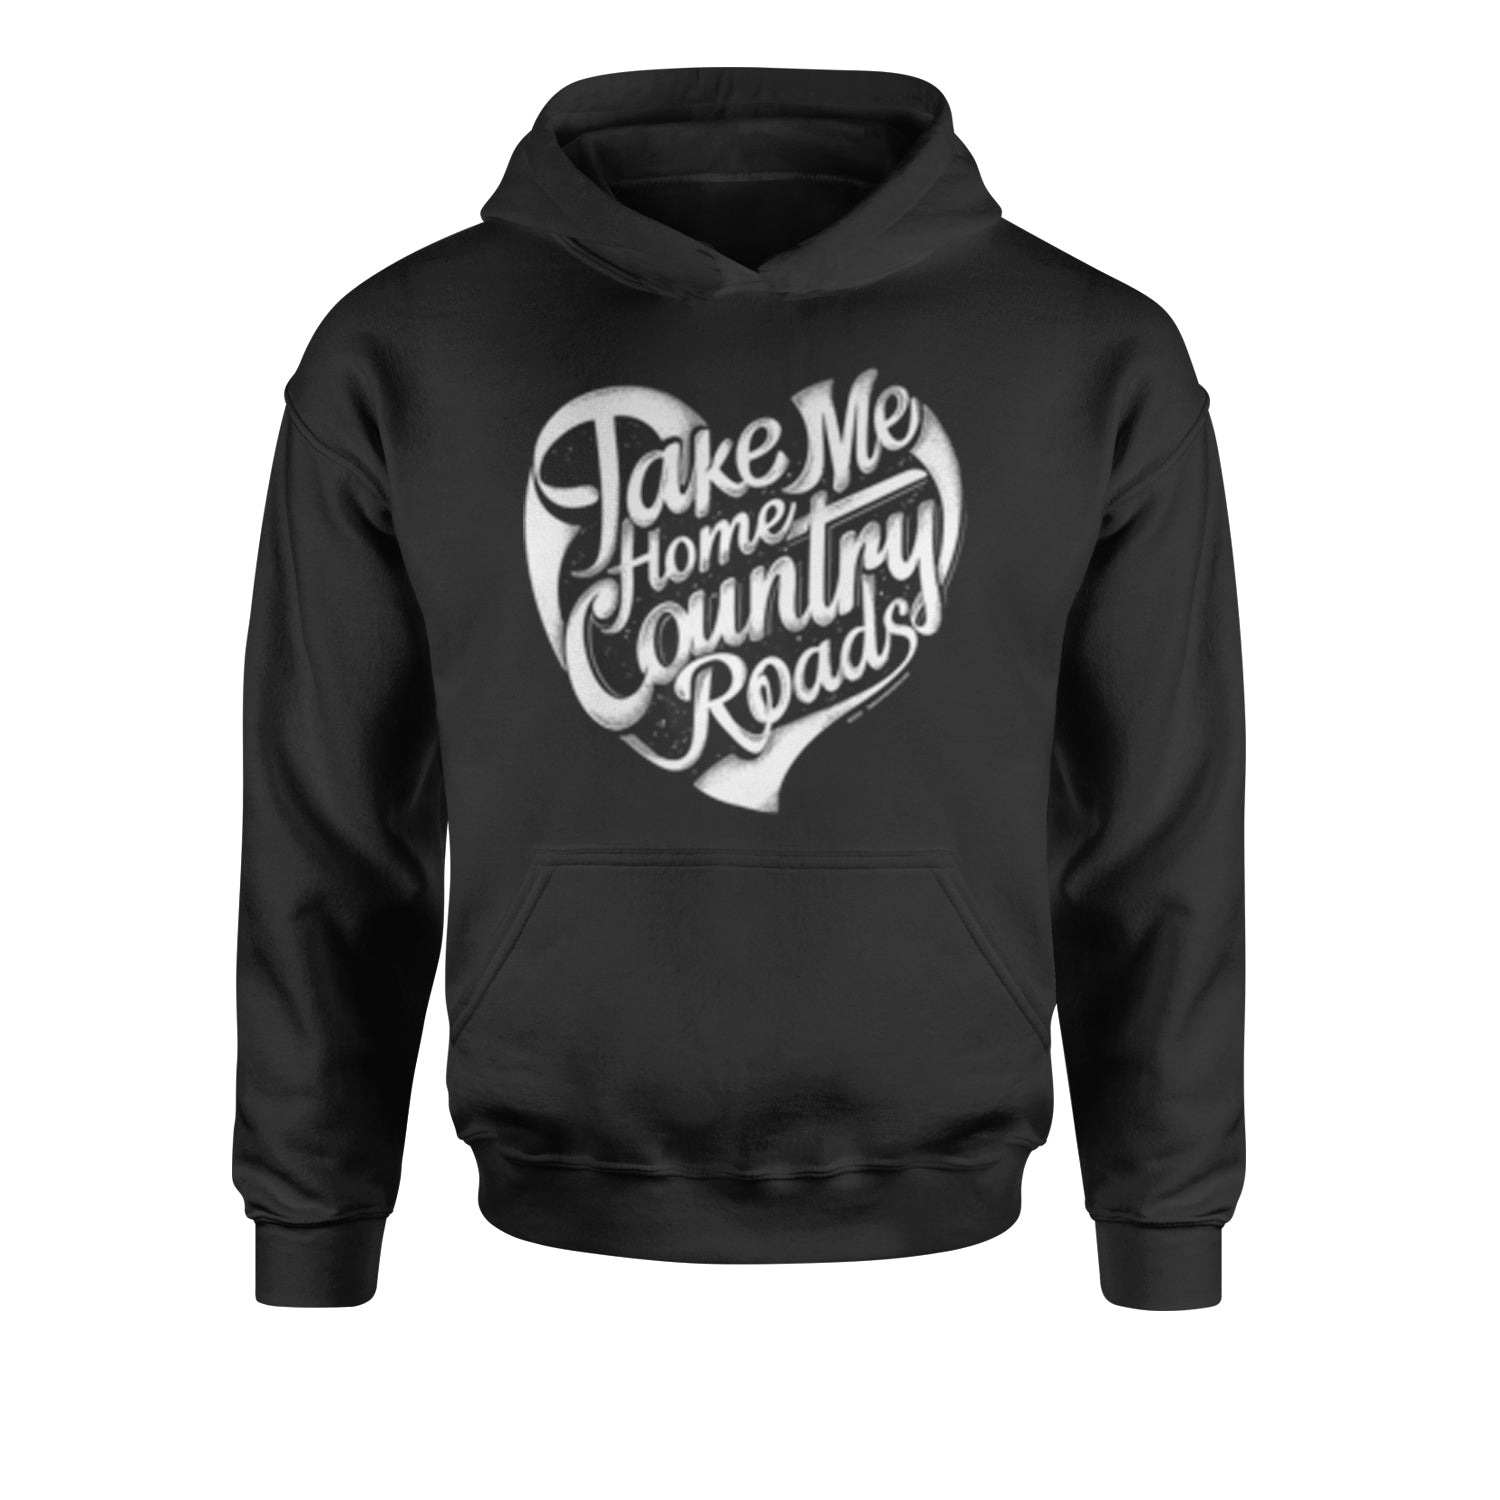 Take Me Home Country Roads Youth-Sized Hoodie country, karaoke, roads by Expression Tees